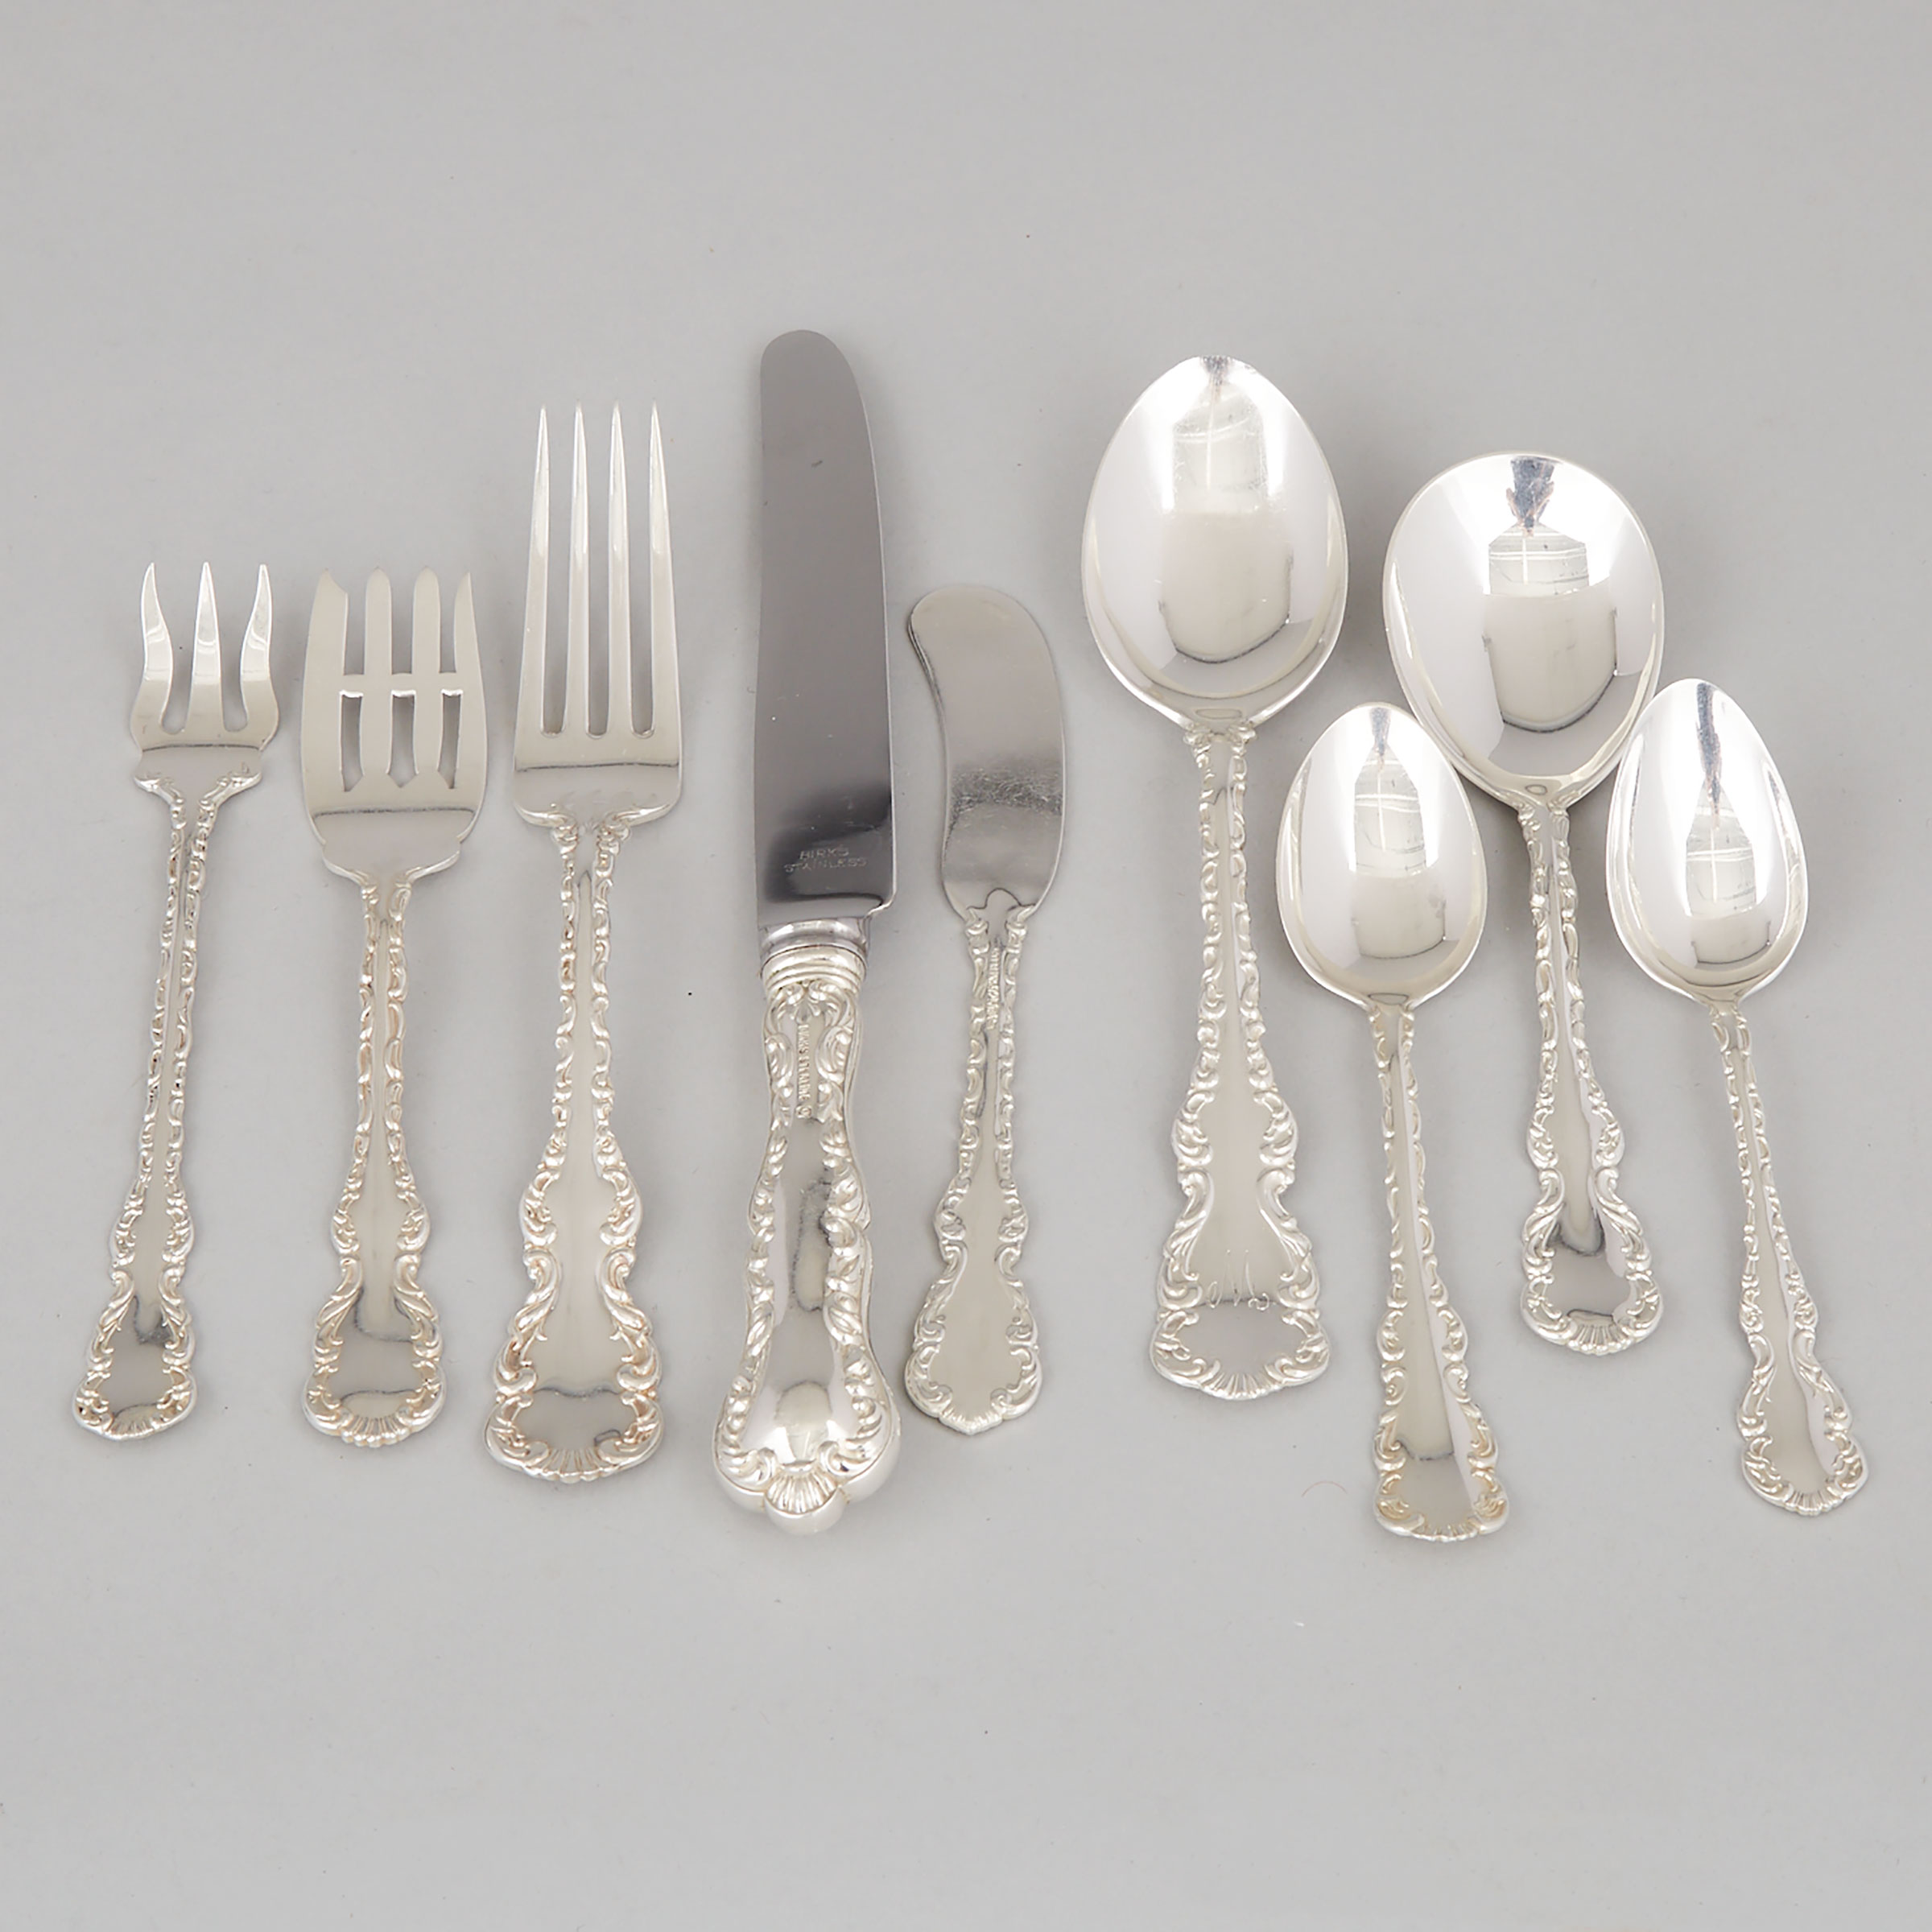 Canadian Silver ‘Louis XV’ Pattern Flatware Service, Henry Birks & Sons, Montreal, Que. and Roden Bros., Toronto, Ont., 20th century